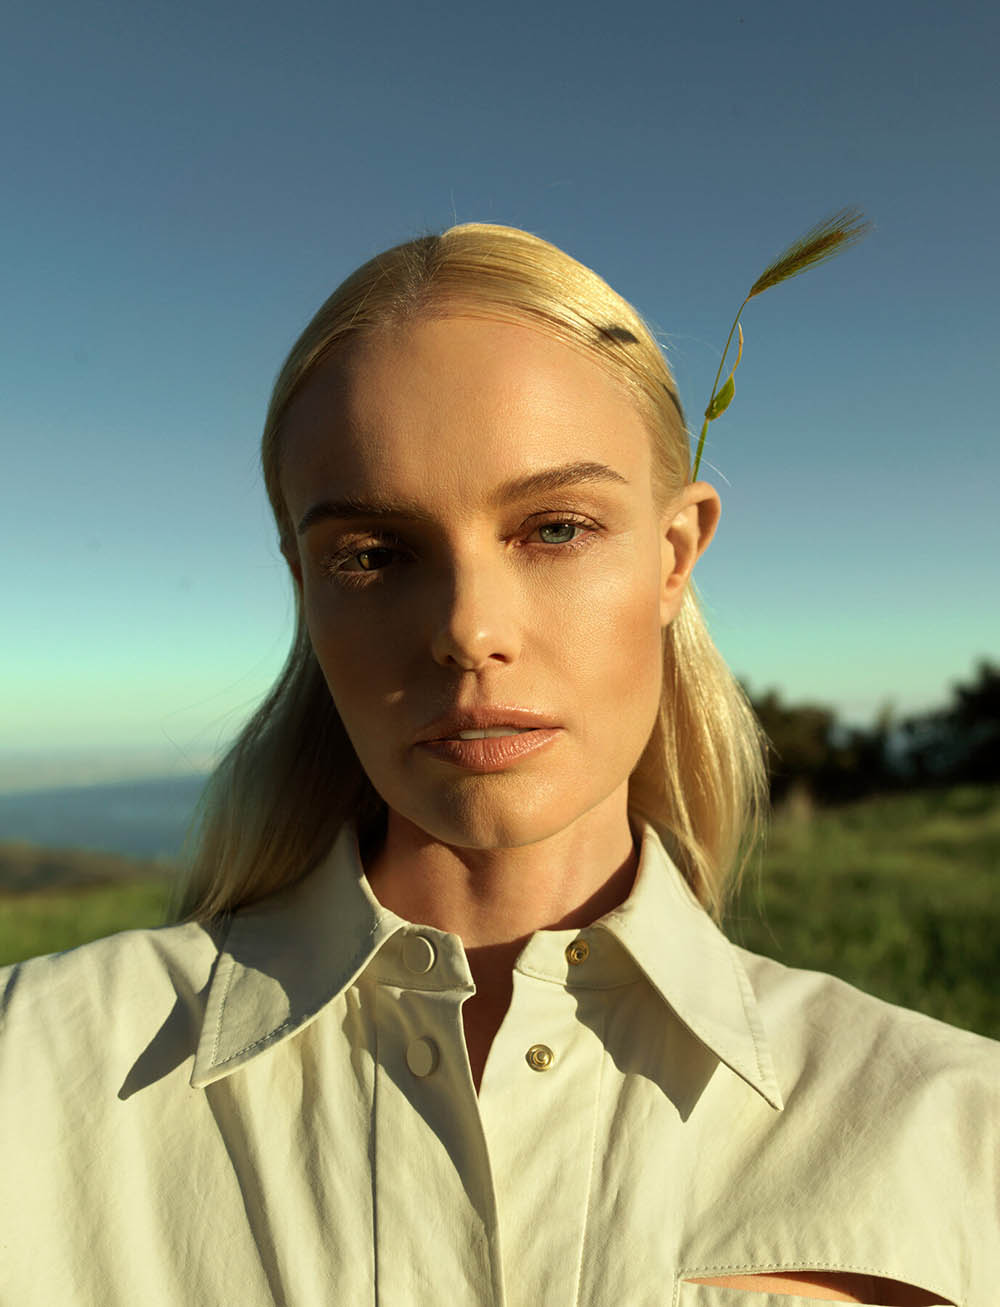 Kate Bosworth covers Flaunt Magazine Issue 170 by Nina Raasch